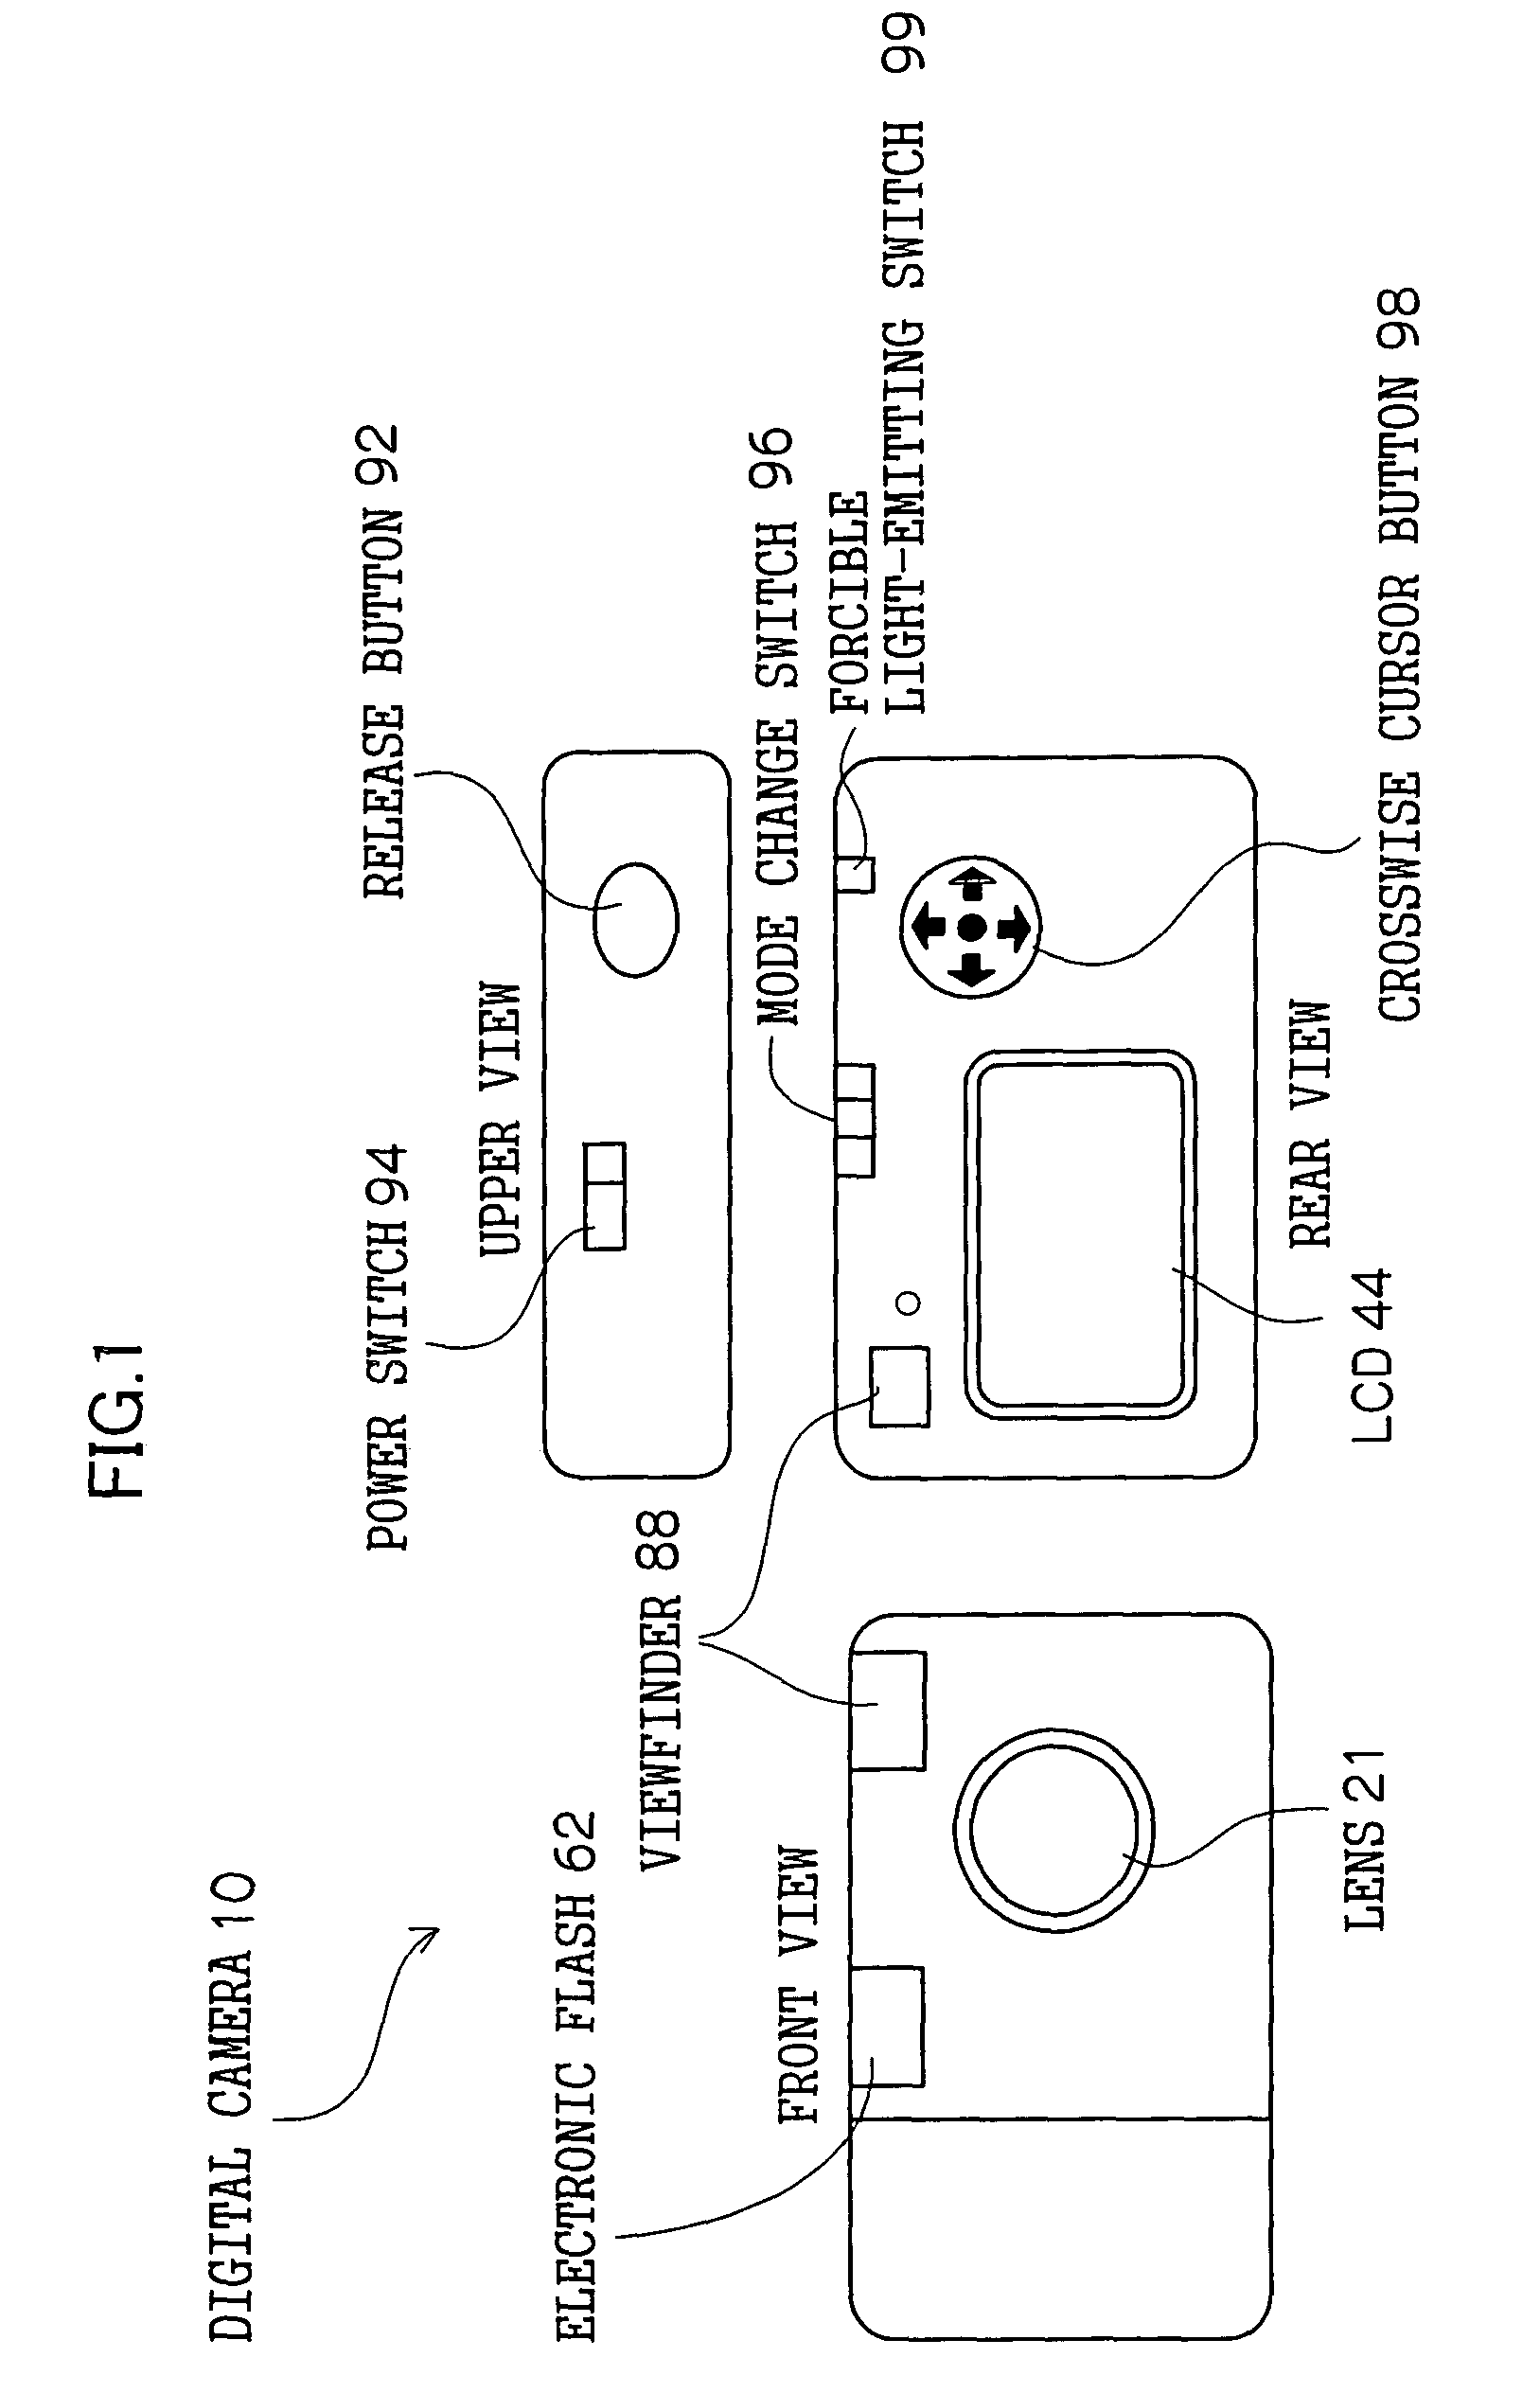 Digital camera and method of preventing image data from being erased from the digital camera